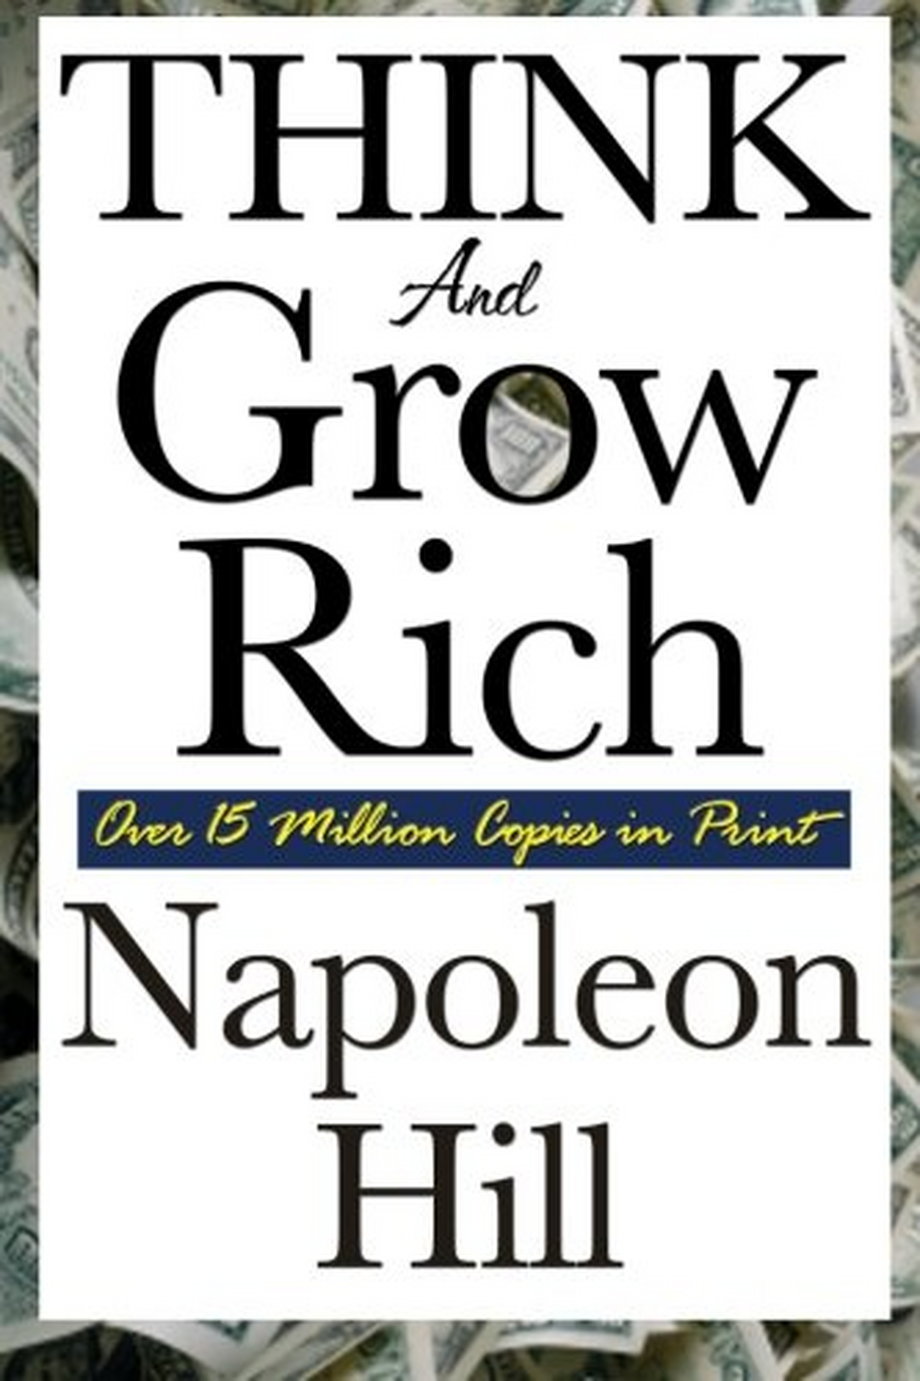 'Think and Grow Rich' by Napoleon Hill